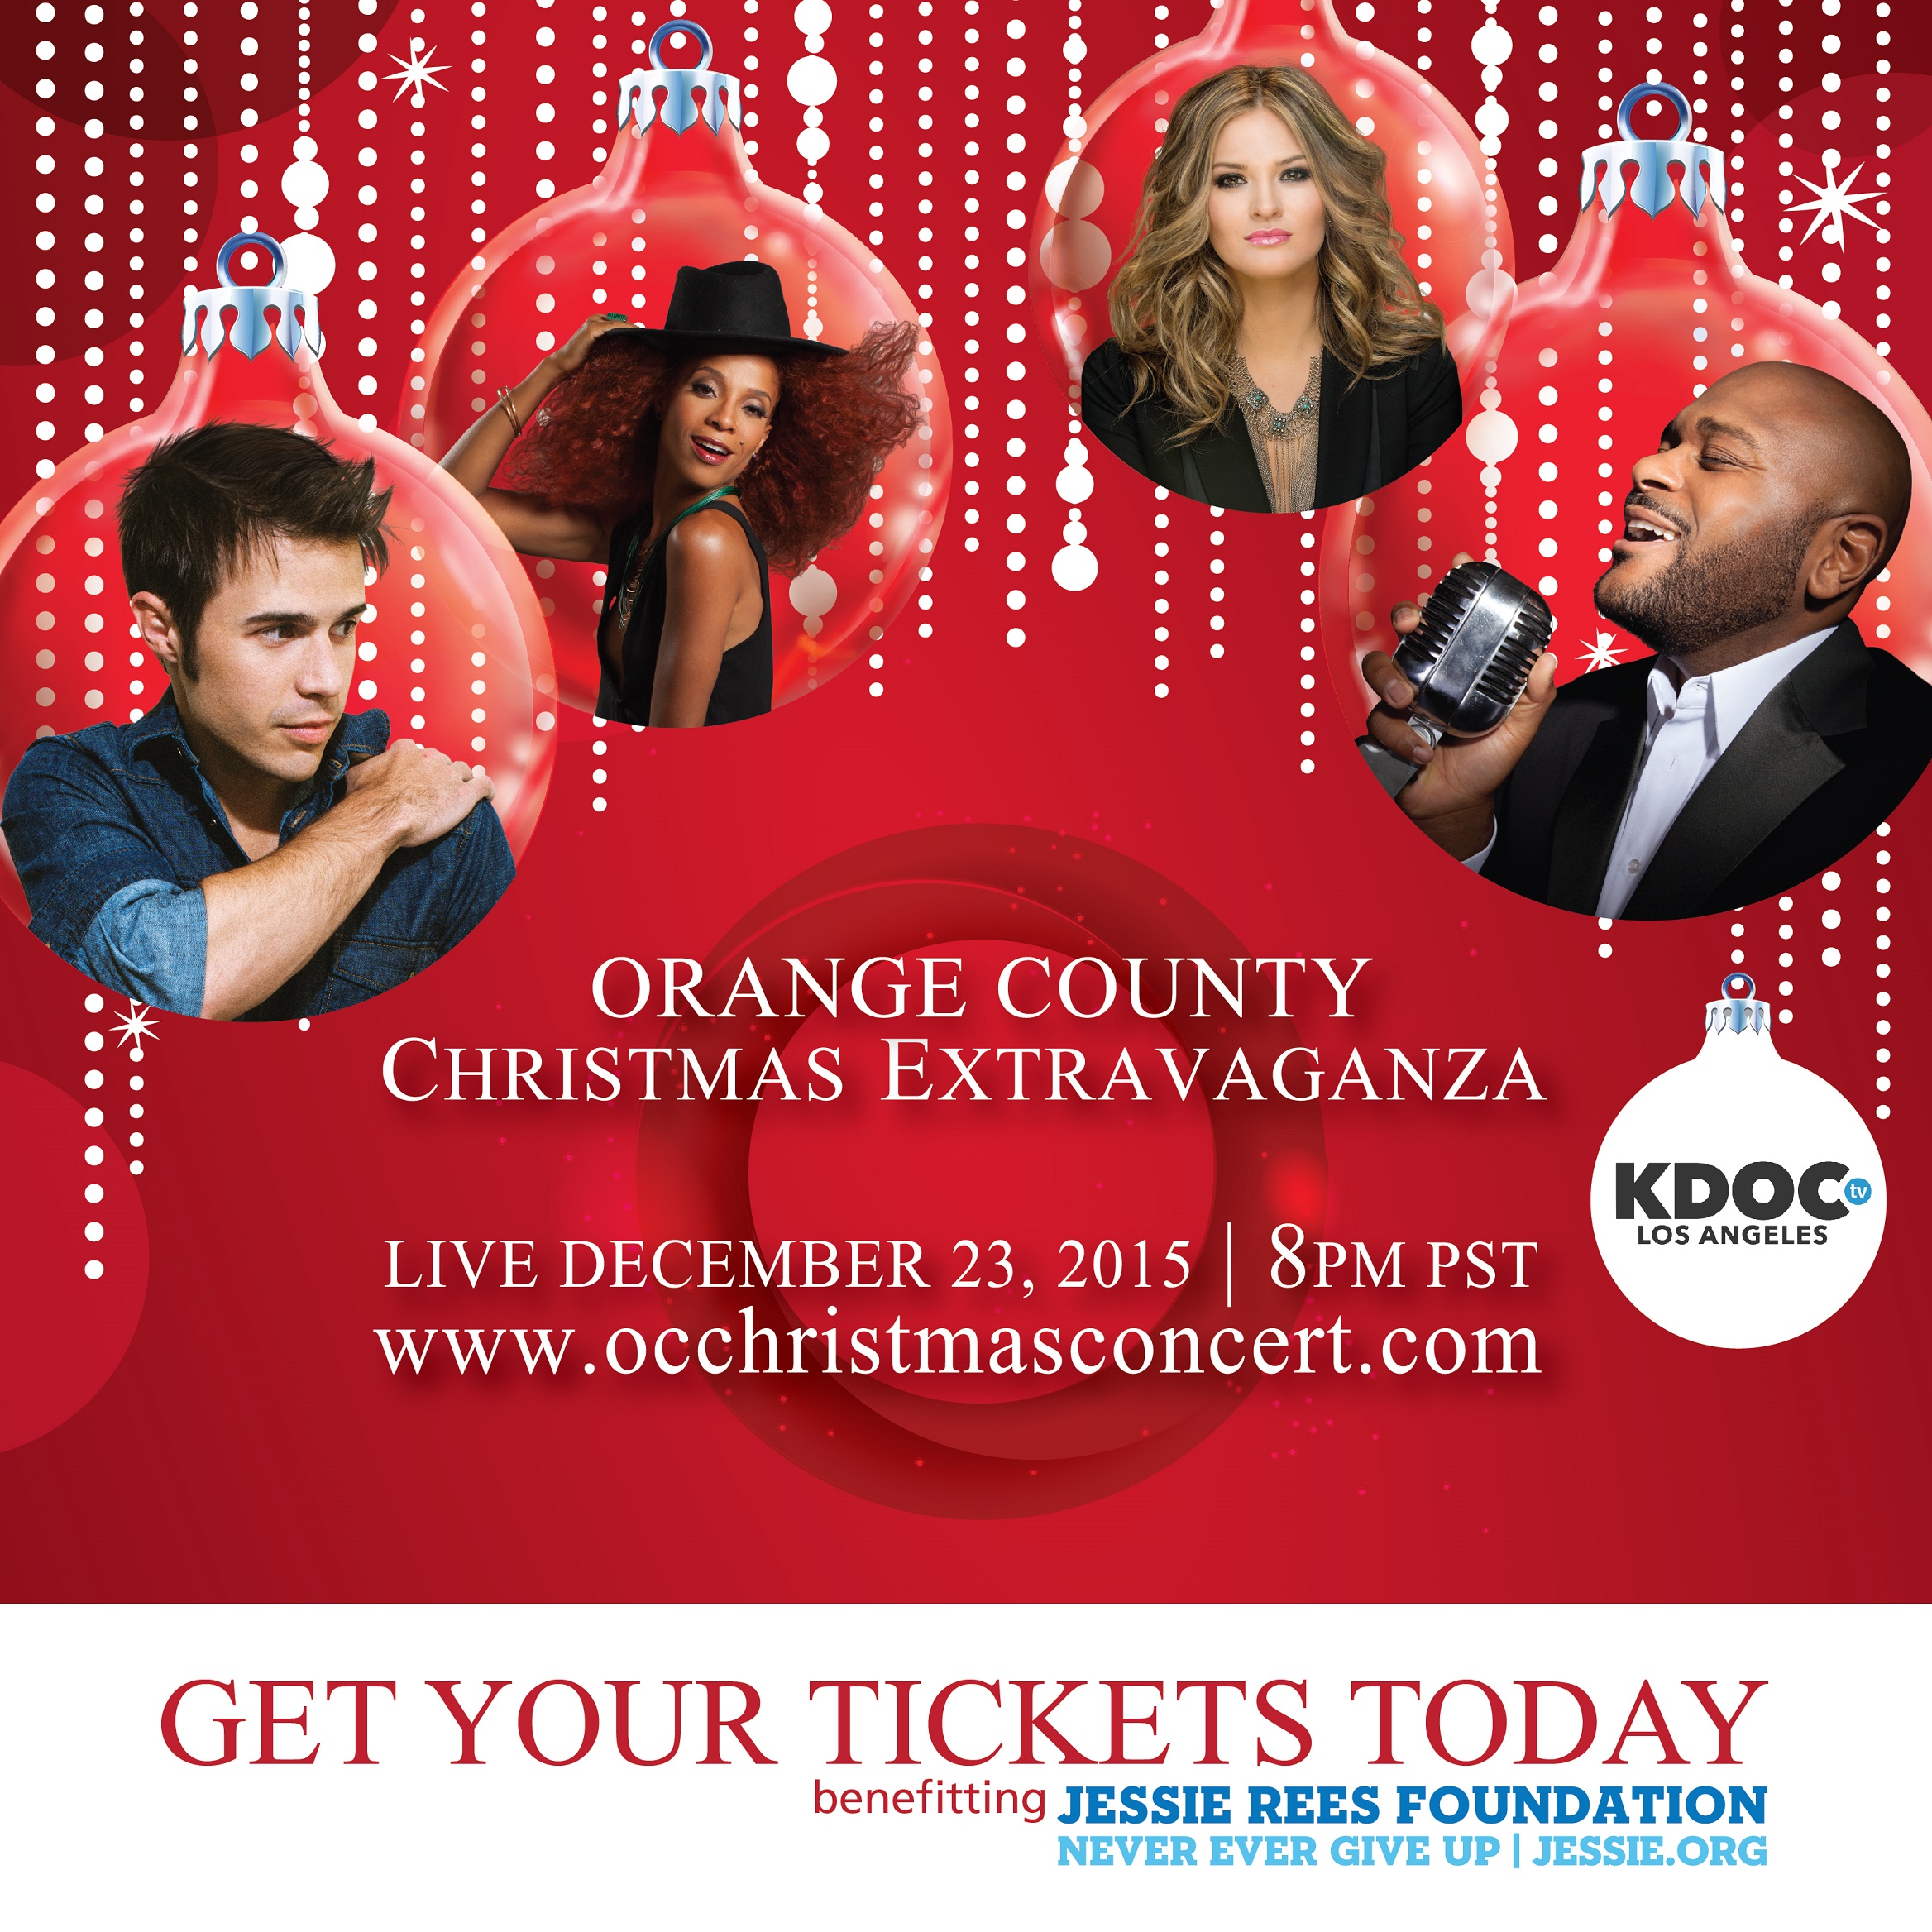 Orange County’s Christmas Extravaganza Announces Live Streaming